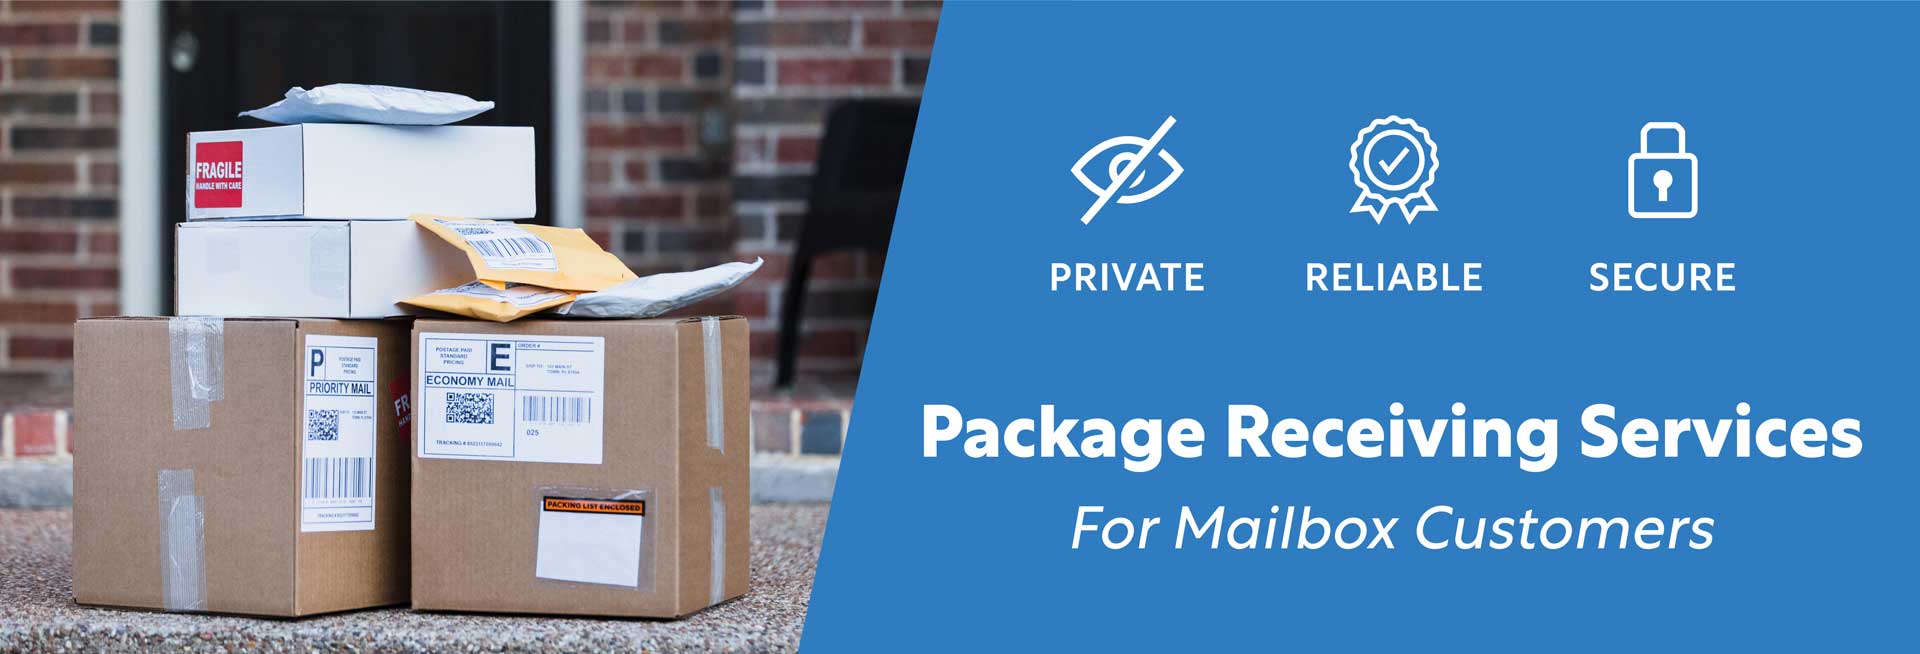 Package Receiving Services in San Diego - Point Loma / Shelter Island